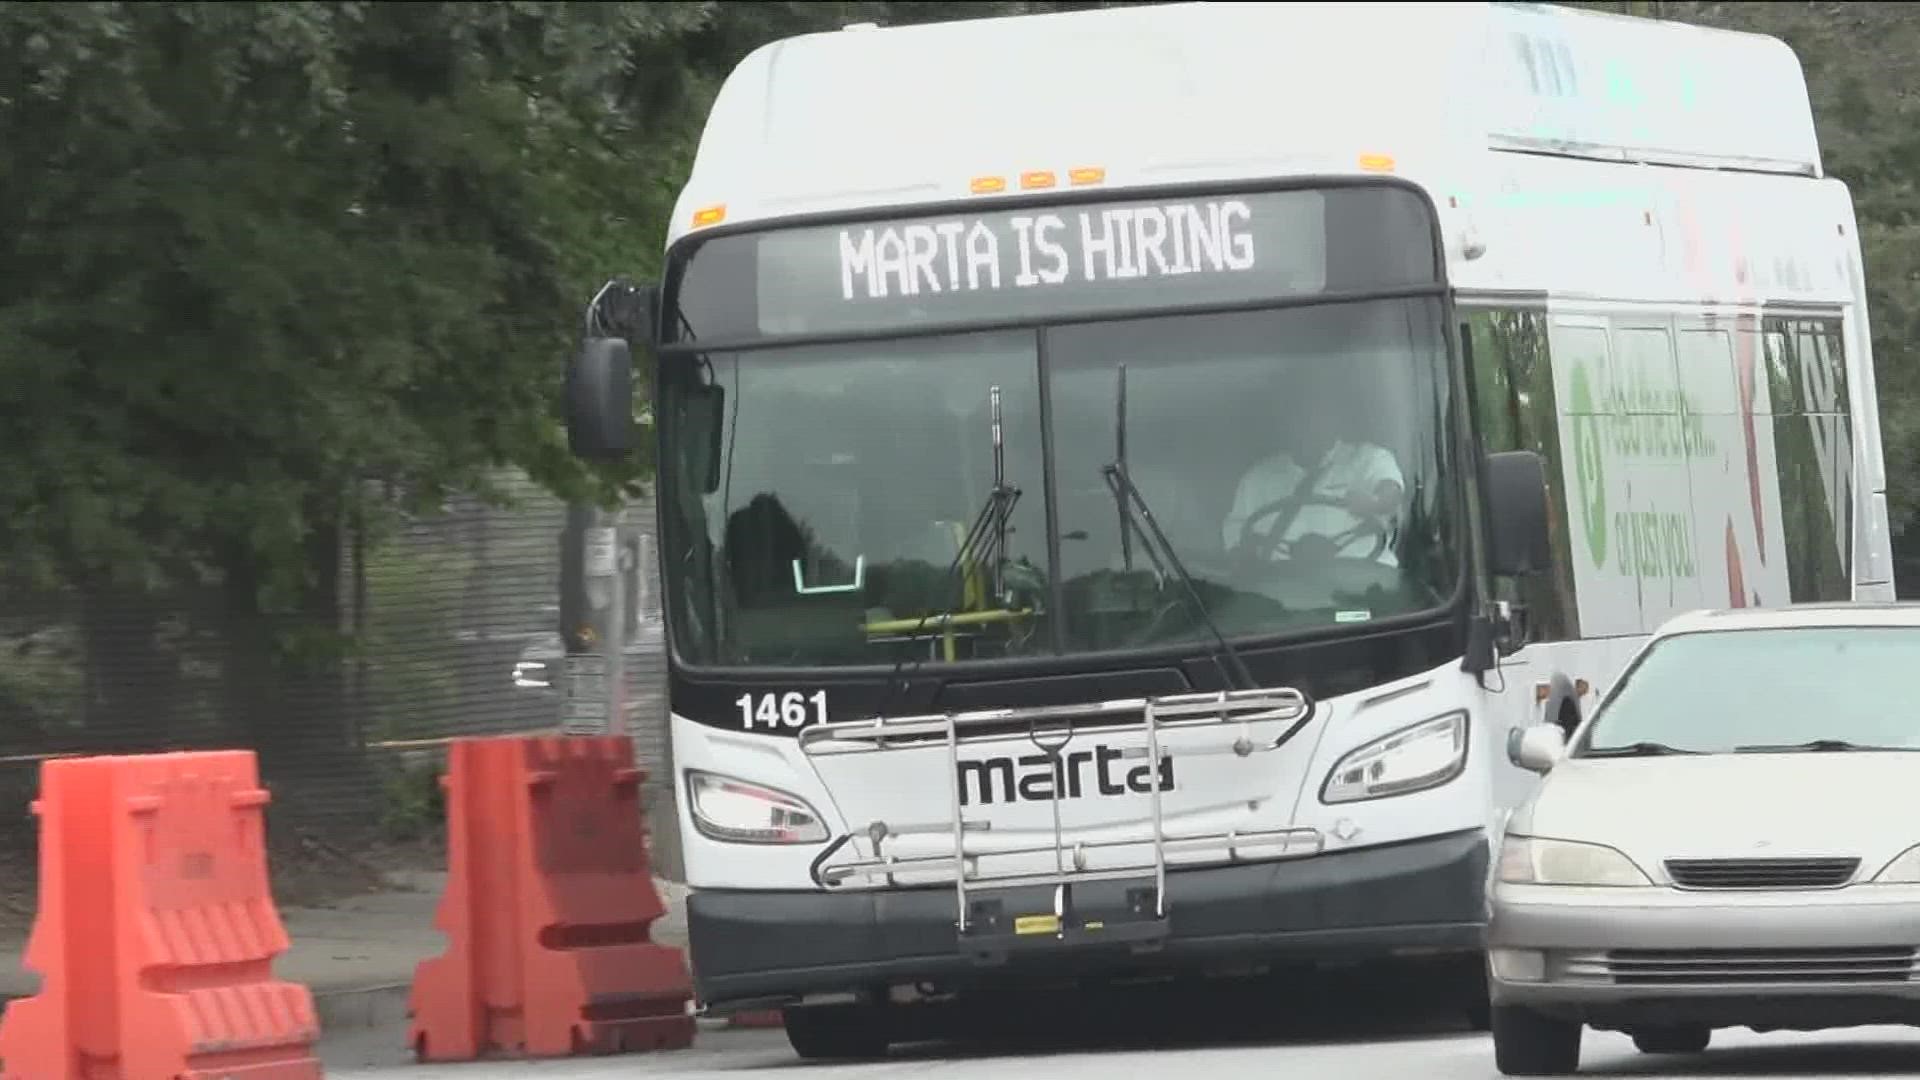 MARTA is giving the gift of free bus rides this holiday season.